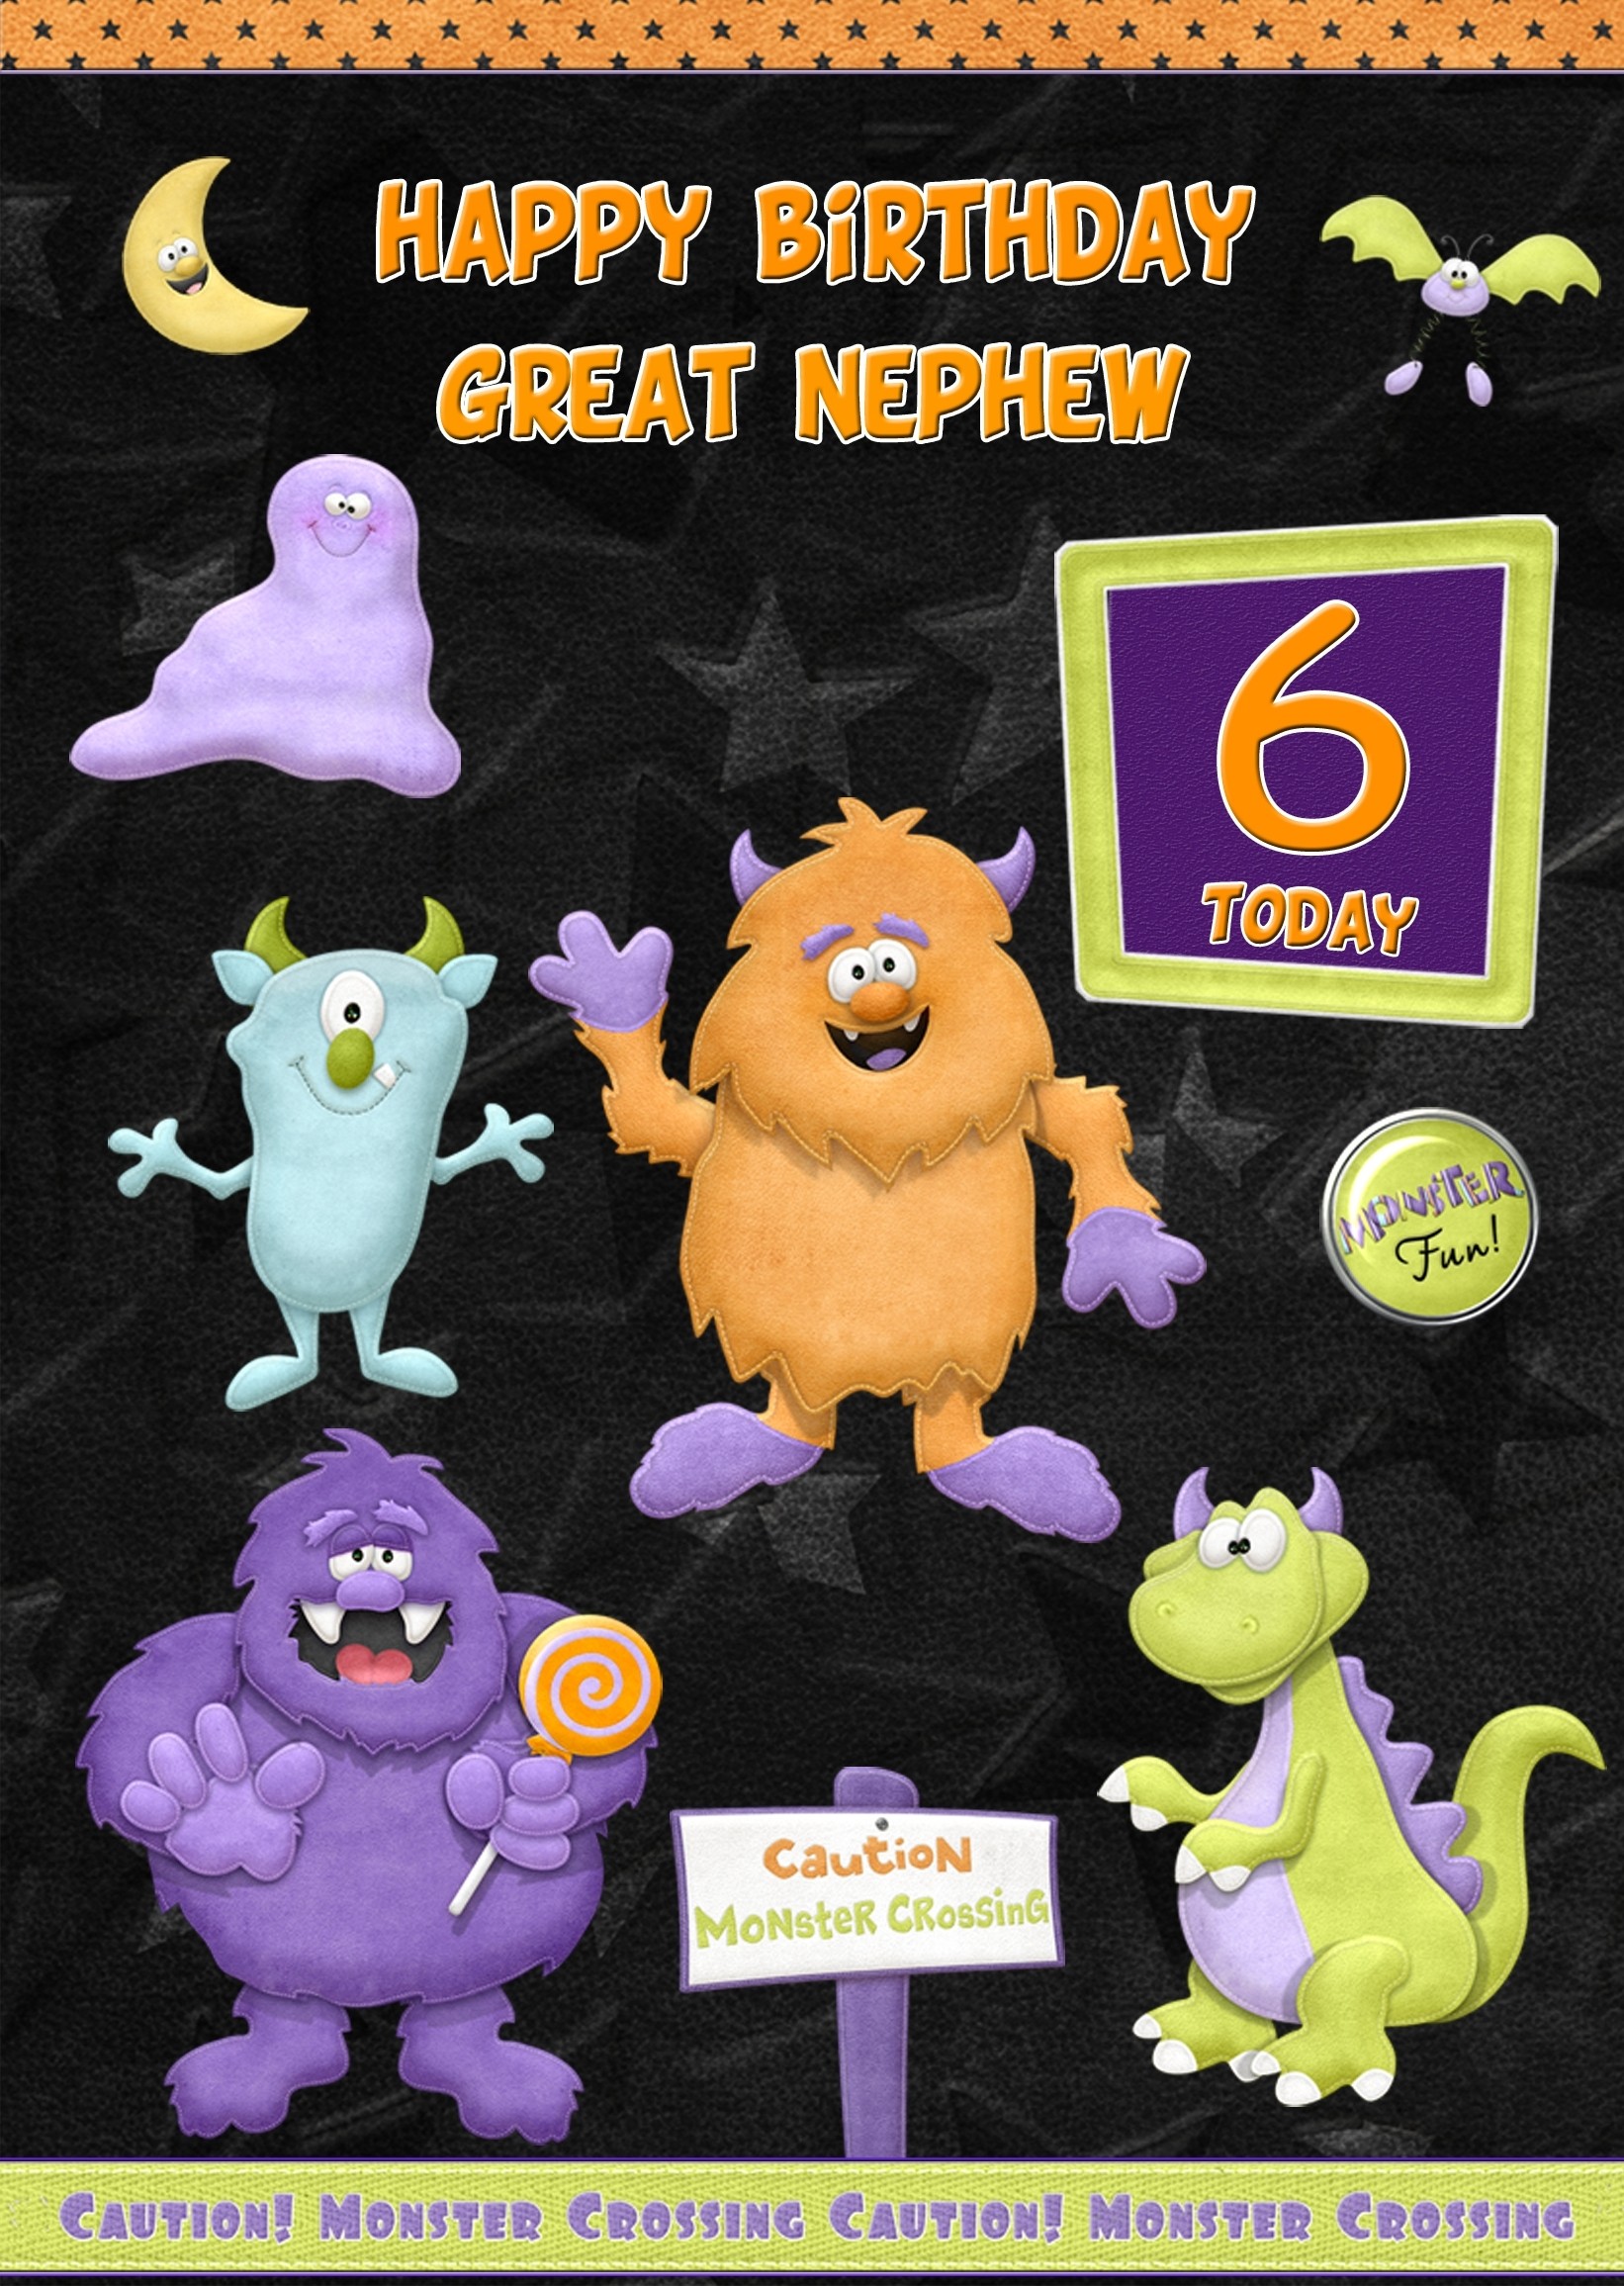 Kids 6th Birthday Funny Monster Cartoon Card for Great Nephew